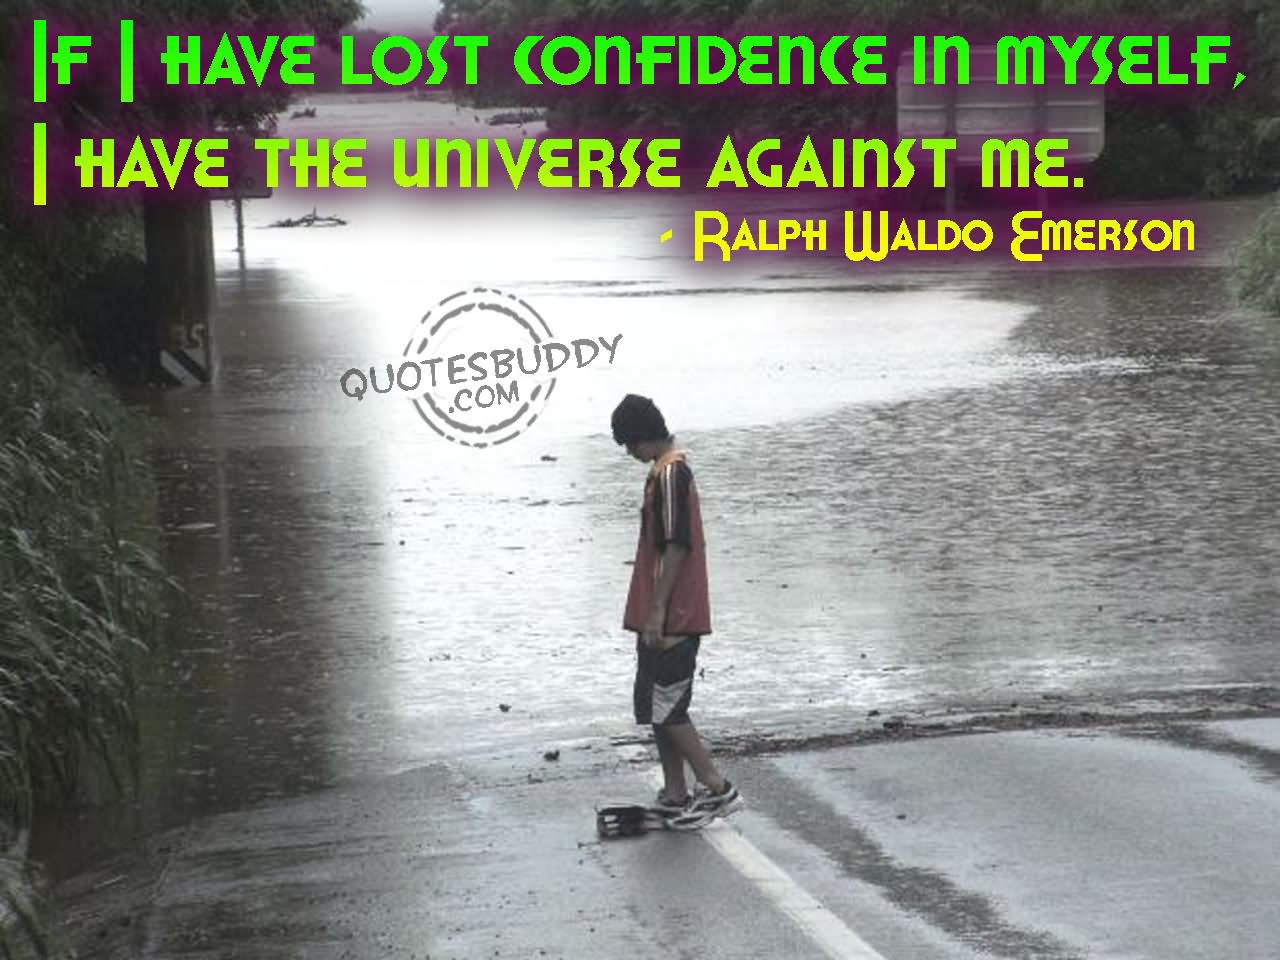 If I have lost confidence in myself, I have the universe against me.